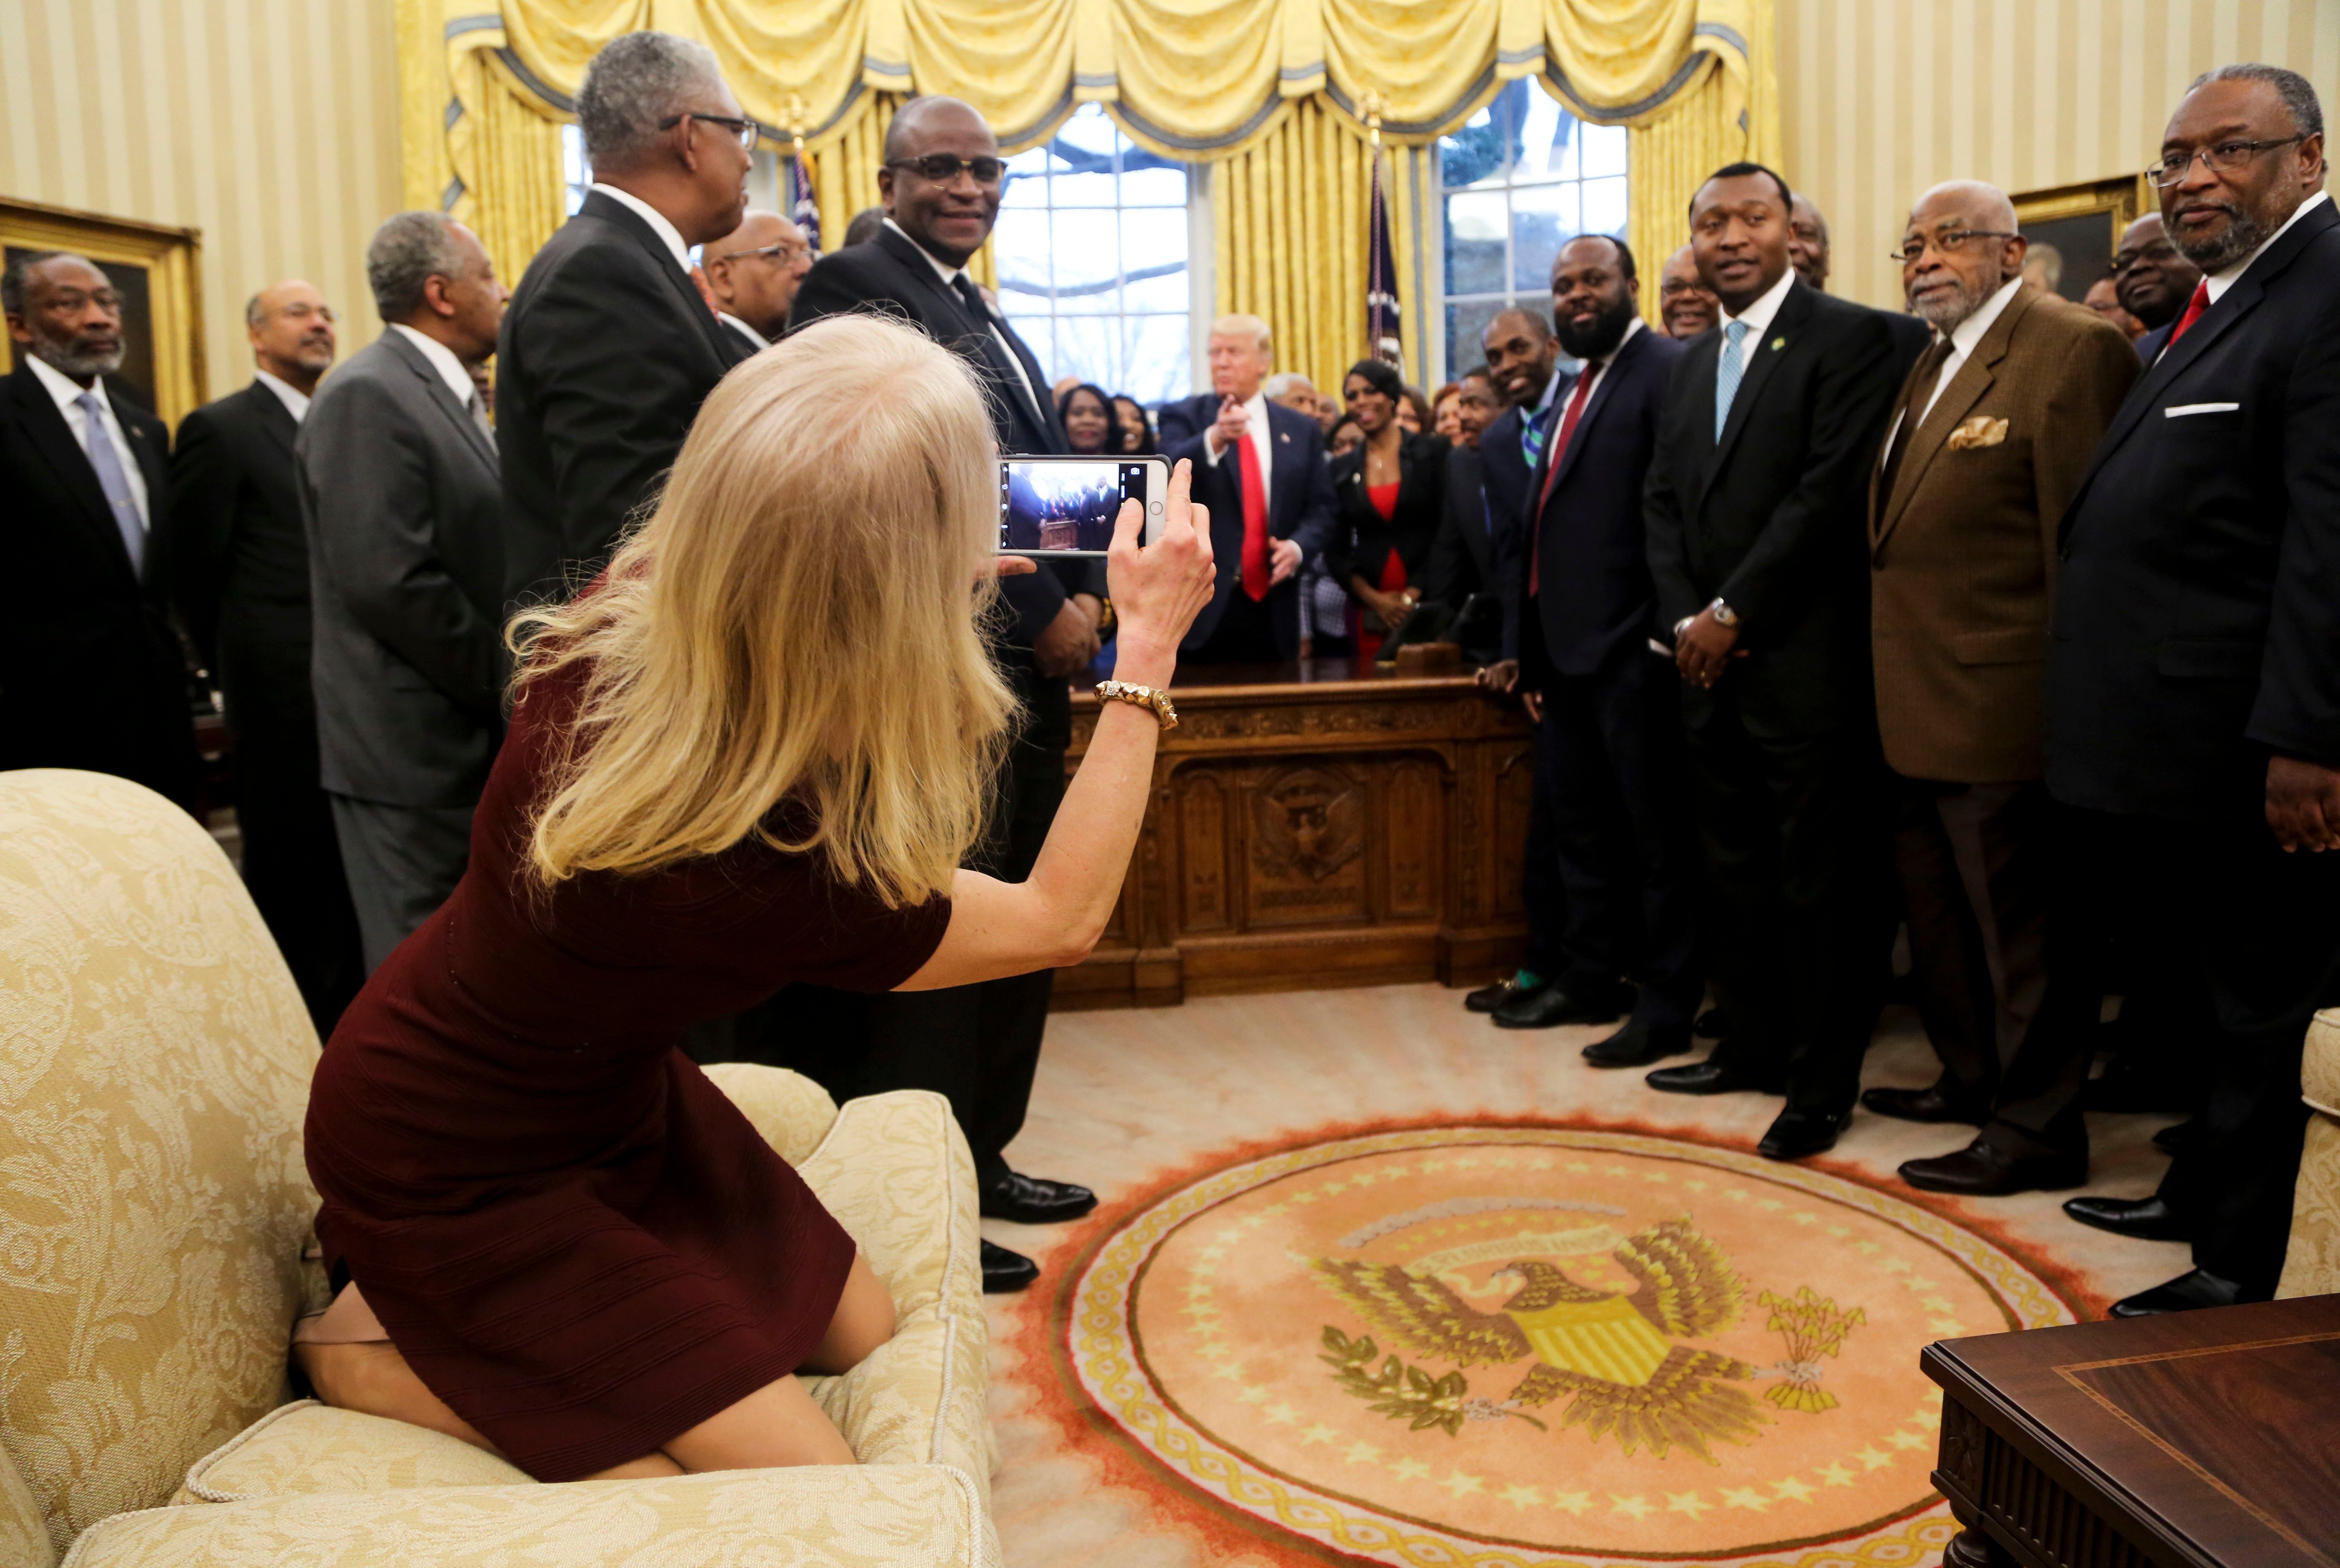 WASHINGTON, DC - FEBRUARY 27: Counselor to the President Kellyanne Conway takes a picture of U.S. President Donald Trump with members of the Historically Black Colleges and Universities in the Oval Office of the White House, on February 27, 2017 in Washington, DC. (Photo by Aude Guerrucci-Pool/Getty Images)